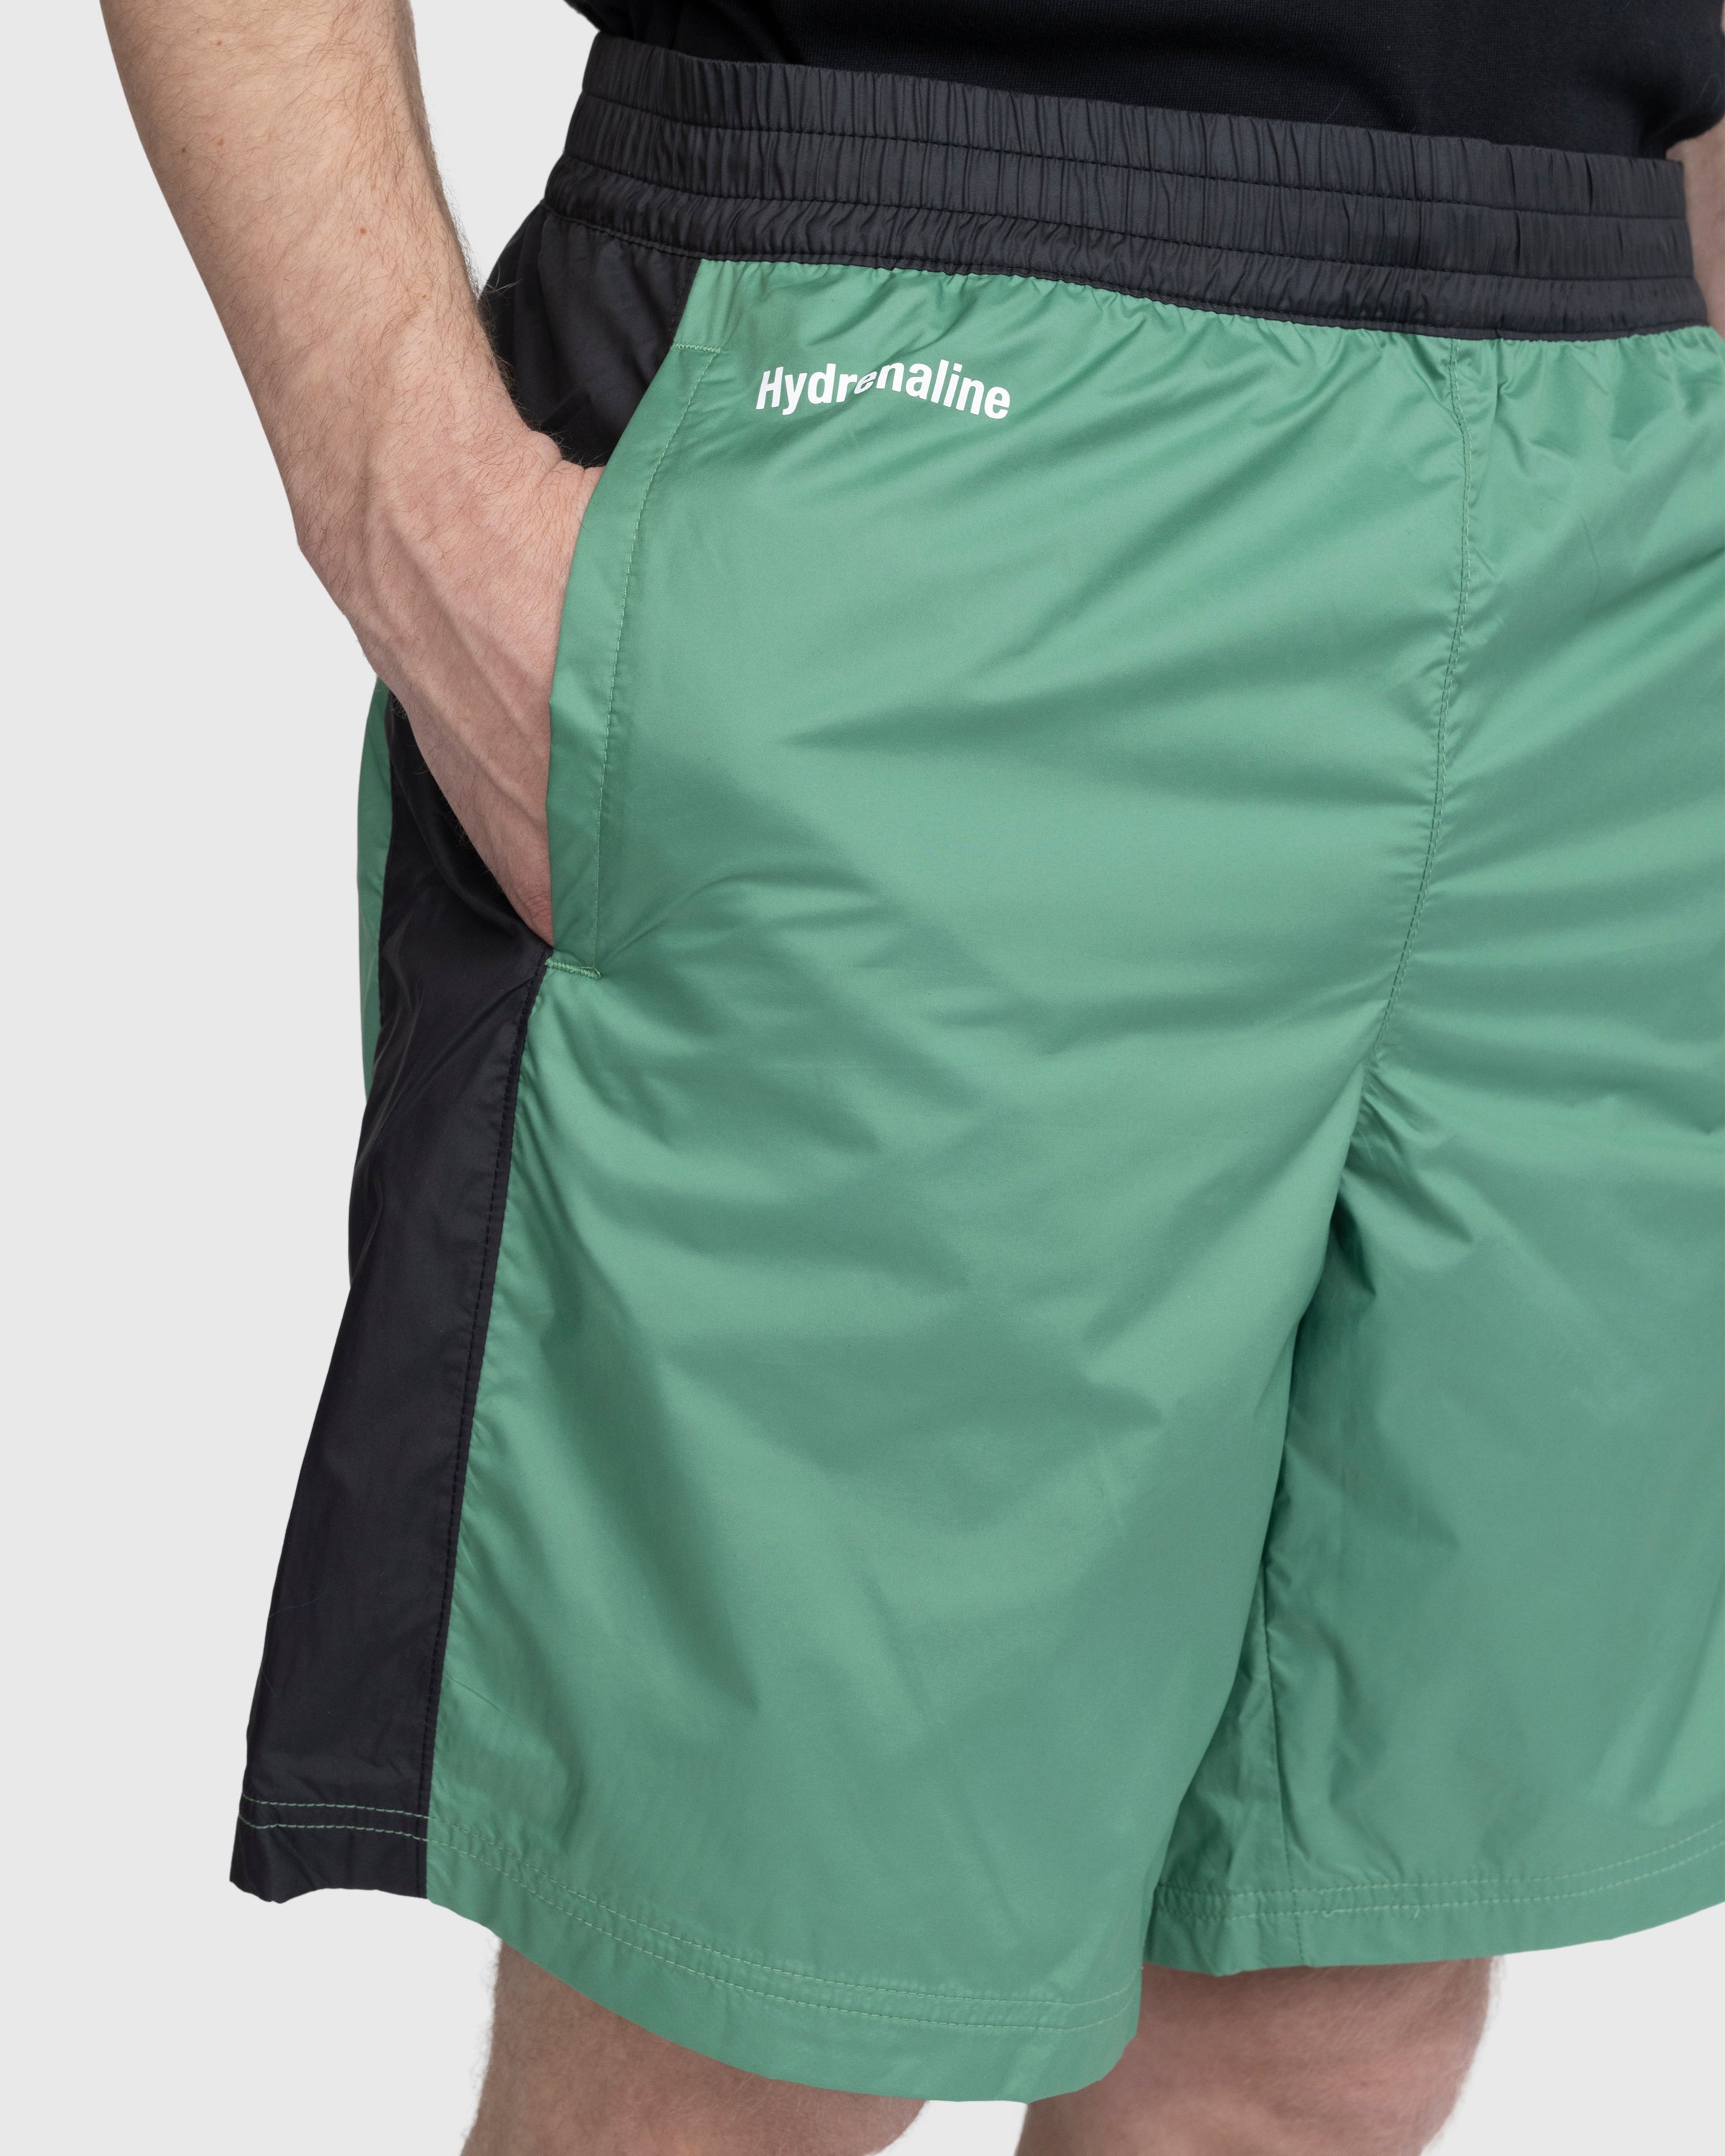 The North Face - Hydrenaline Short Deep Grass Green - Clothing - Green - Image 6